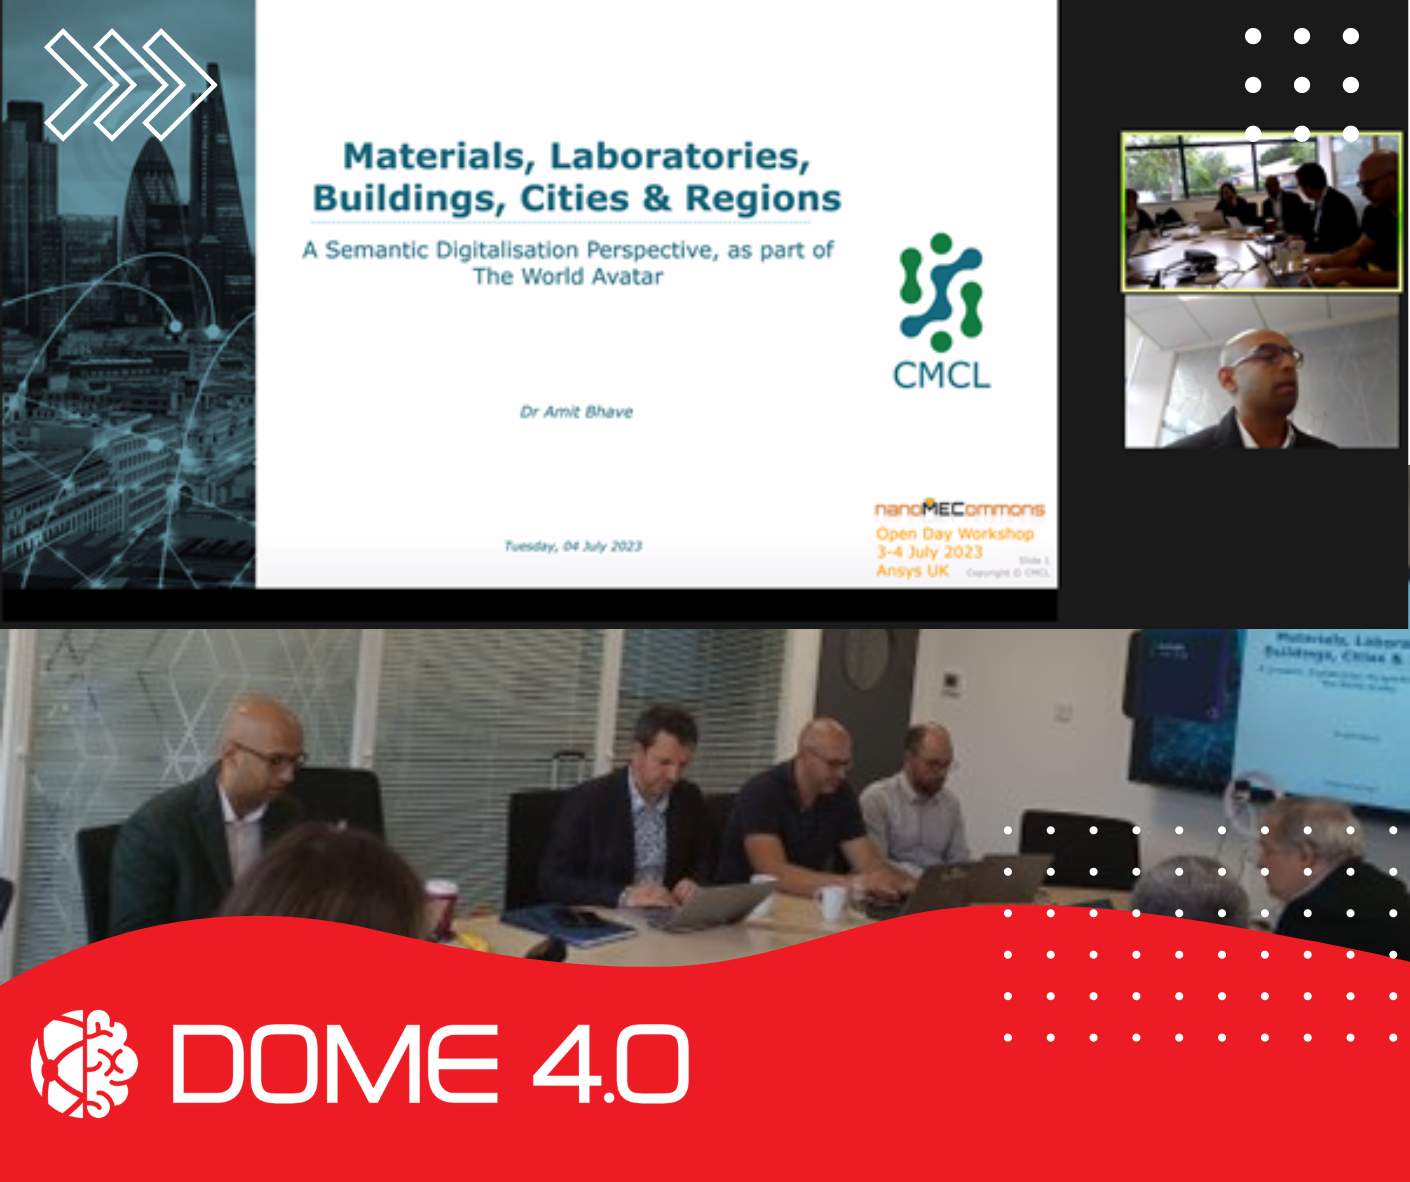 DOME 4.0 Project present at the nanoMECommons Open Day Workshop – 3 -4 July 2023